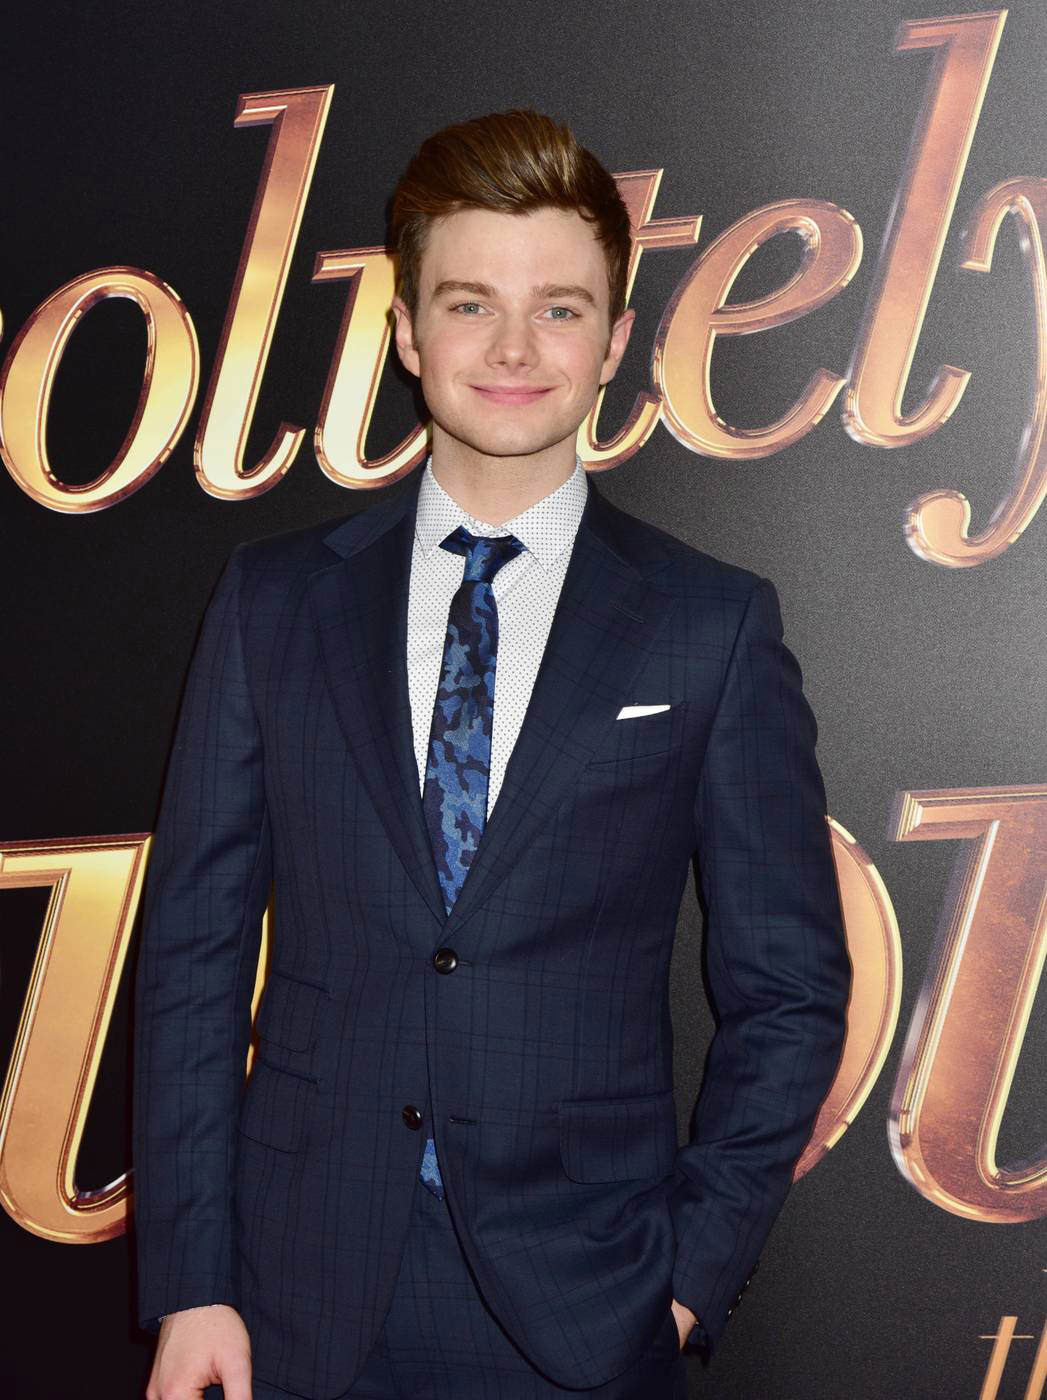 Chris-Colfer-Absolutely-Fabulous-The-Movie-Red-Carpet-Fashion-Tom-Lorenzo-Site (1)